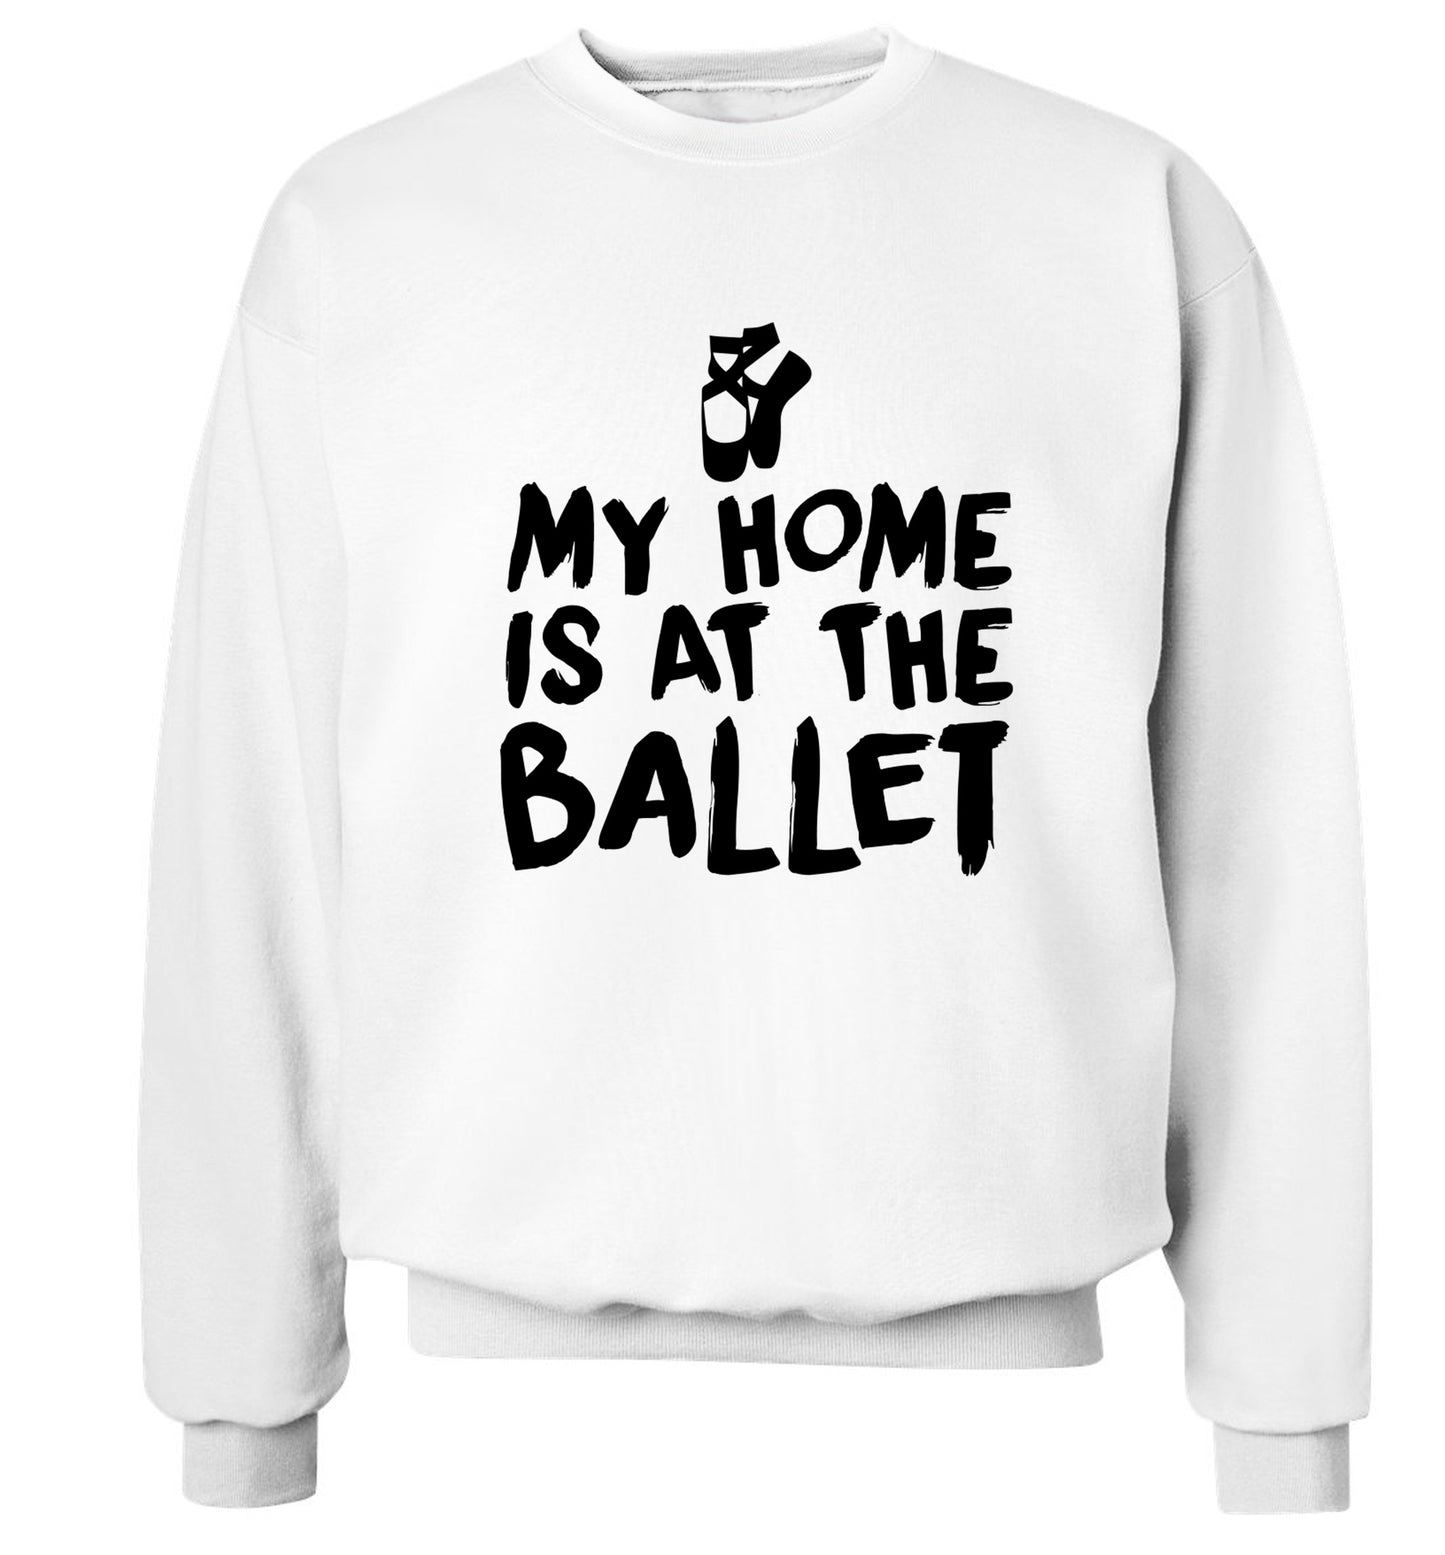 My home is at the ballet Adult's unisex white Sweater 2XL